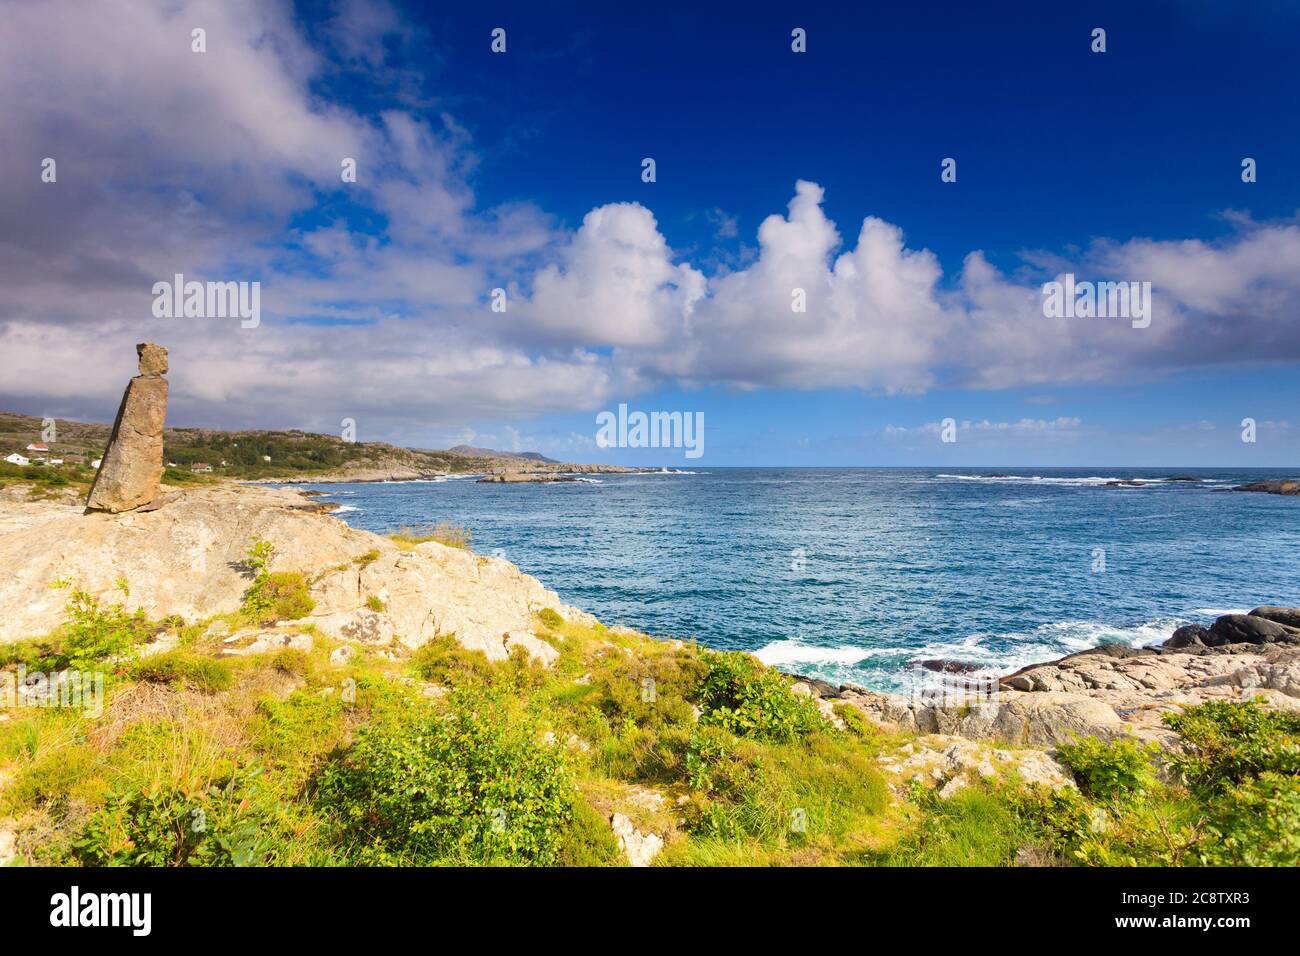 The rocky coast landscape of southern Norway with an ocean view in Rogaland county Norway. Stock Photo